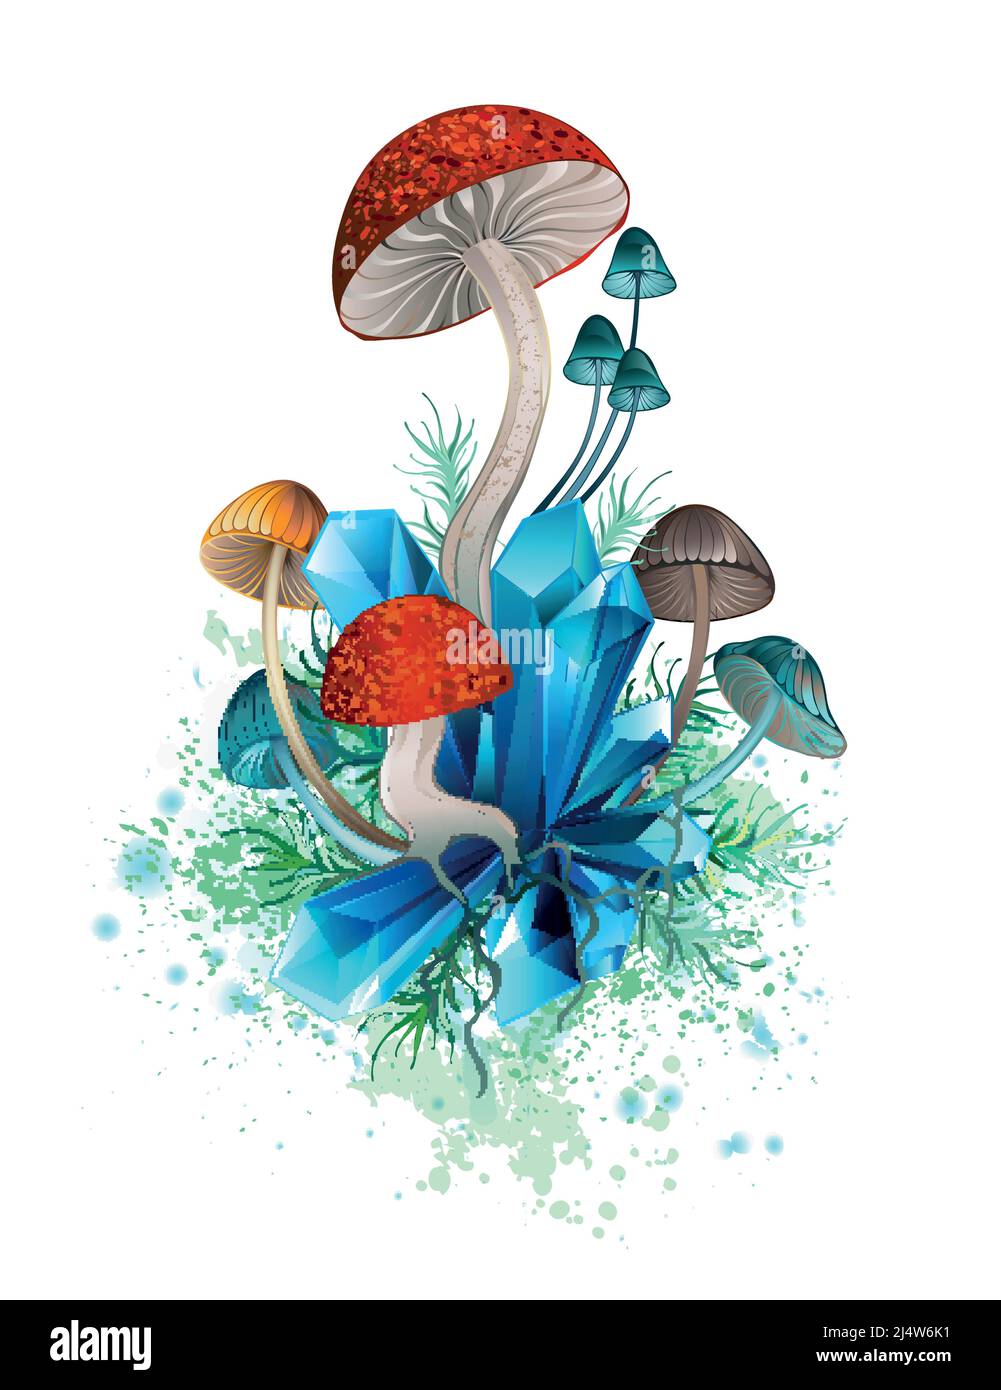 Artistically drawn, red, blue, yellow stylized mushrooms and moss growing on blue crystal. Stock Vector